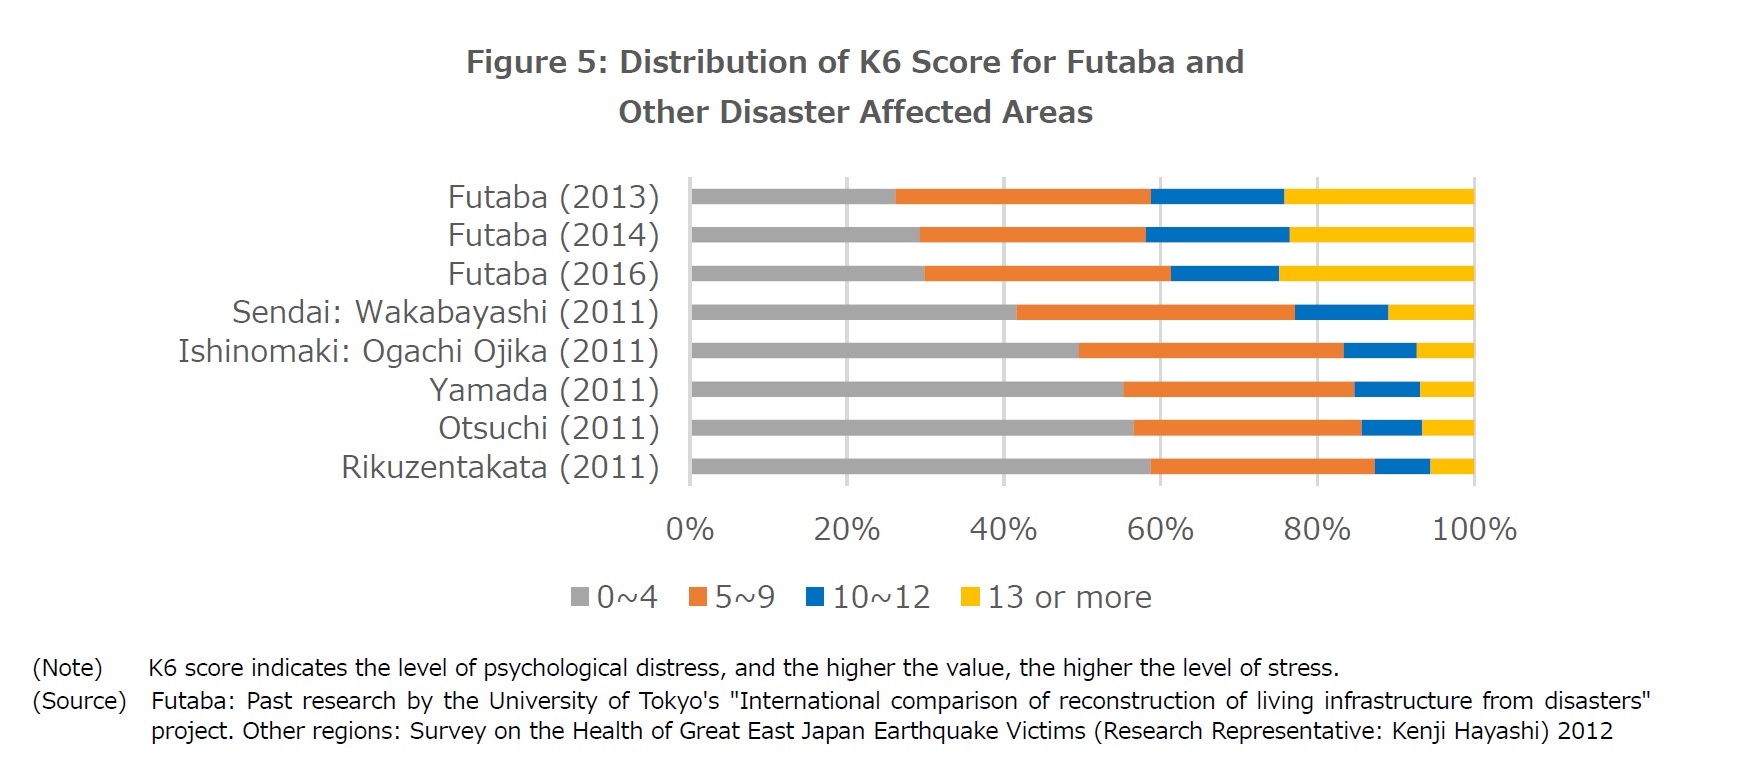 Figure 5: Distribution of K6 Score for Futaba and Other Disaster Affected Areas